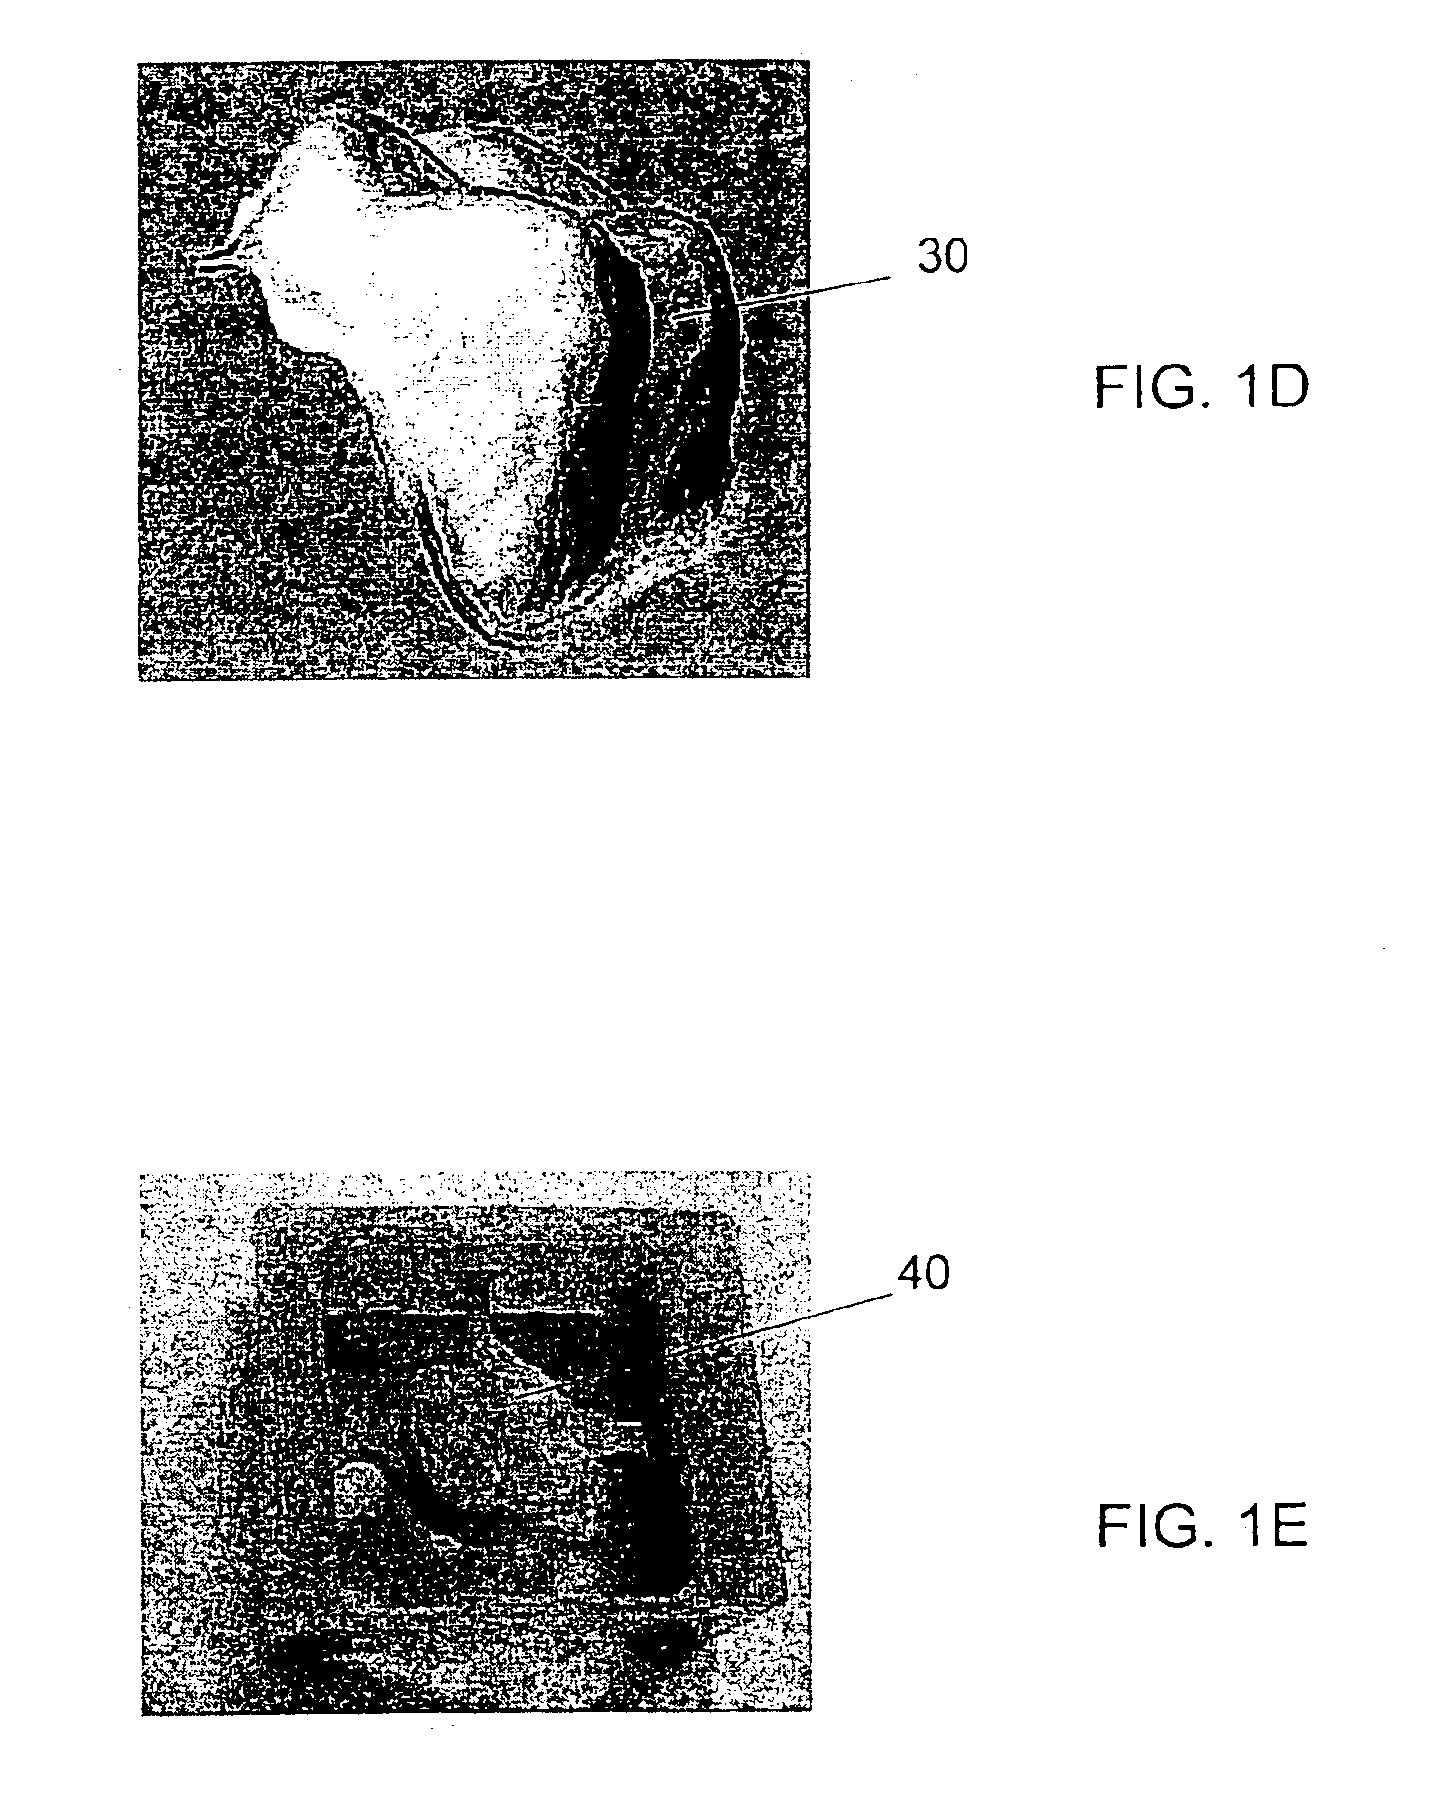 Method and system for fabricating a dental coping, and a coping fabricated thereby